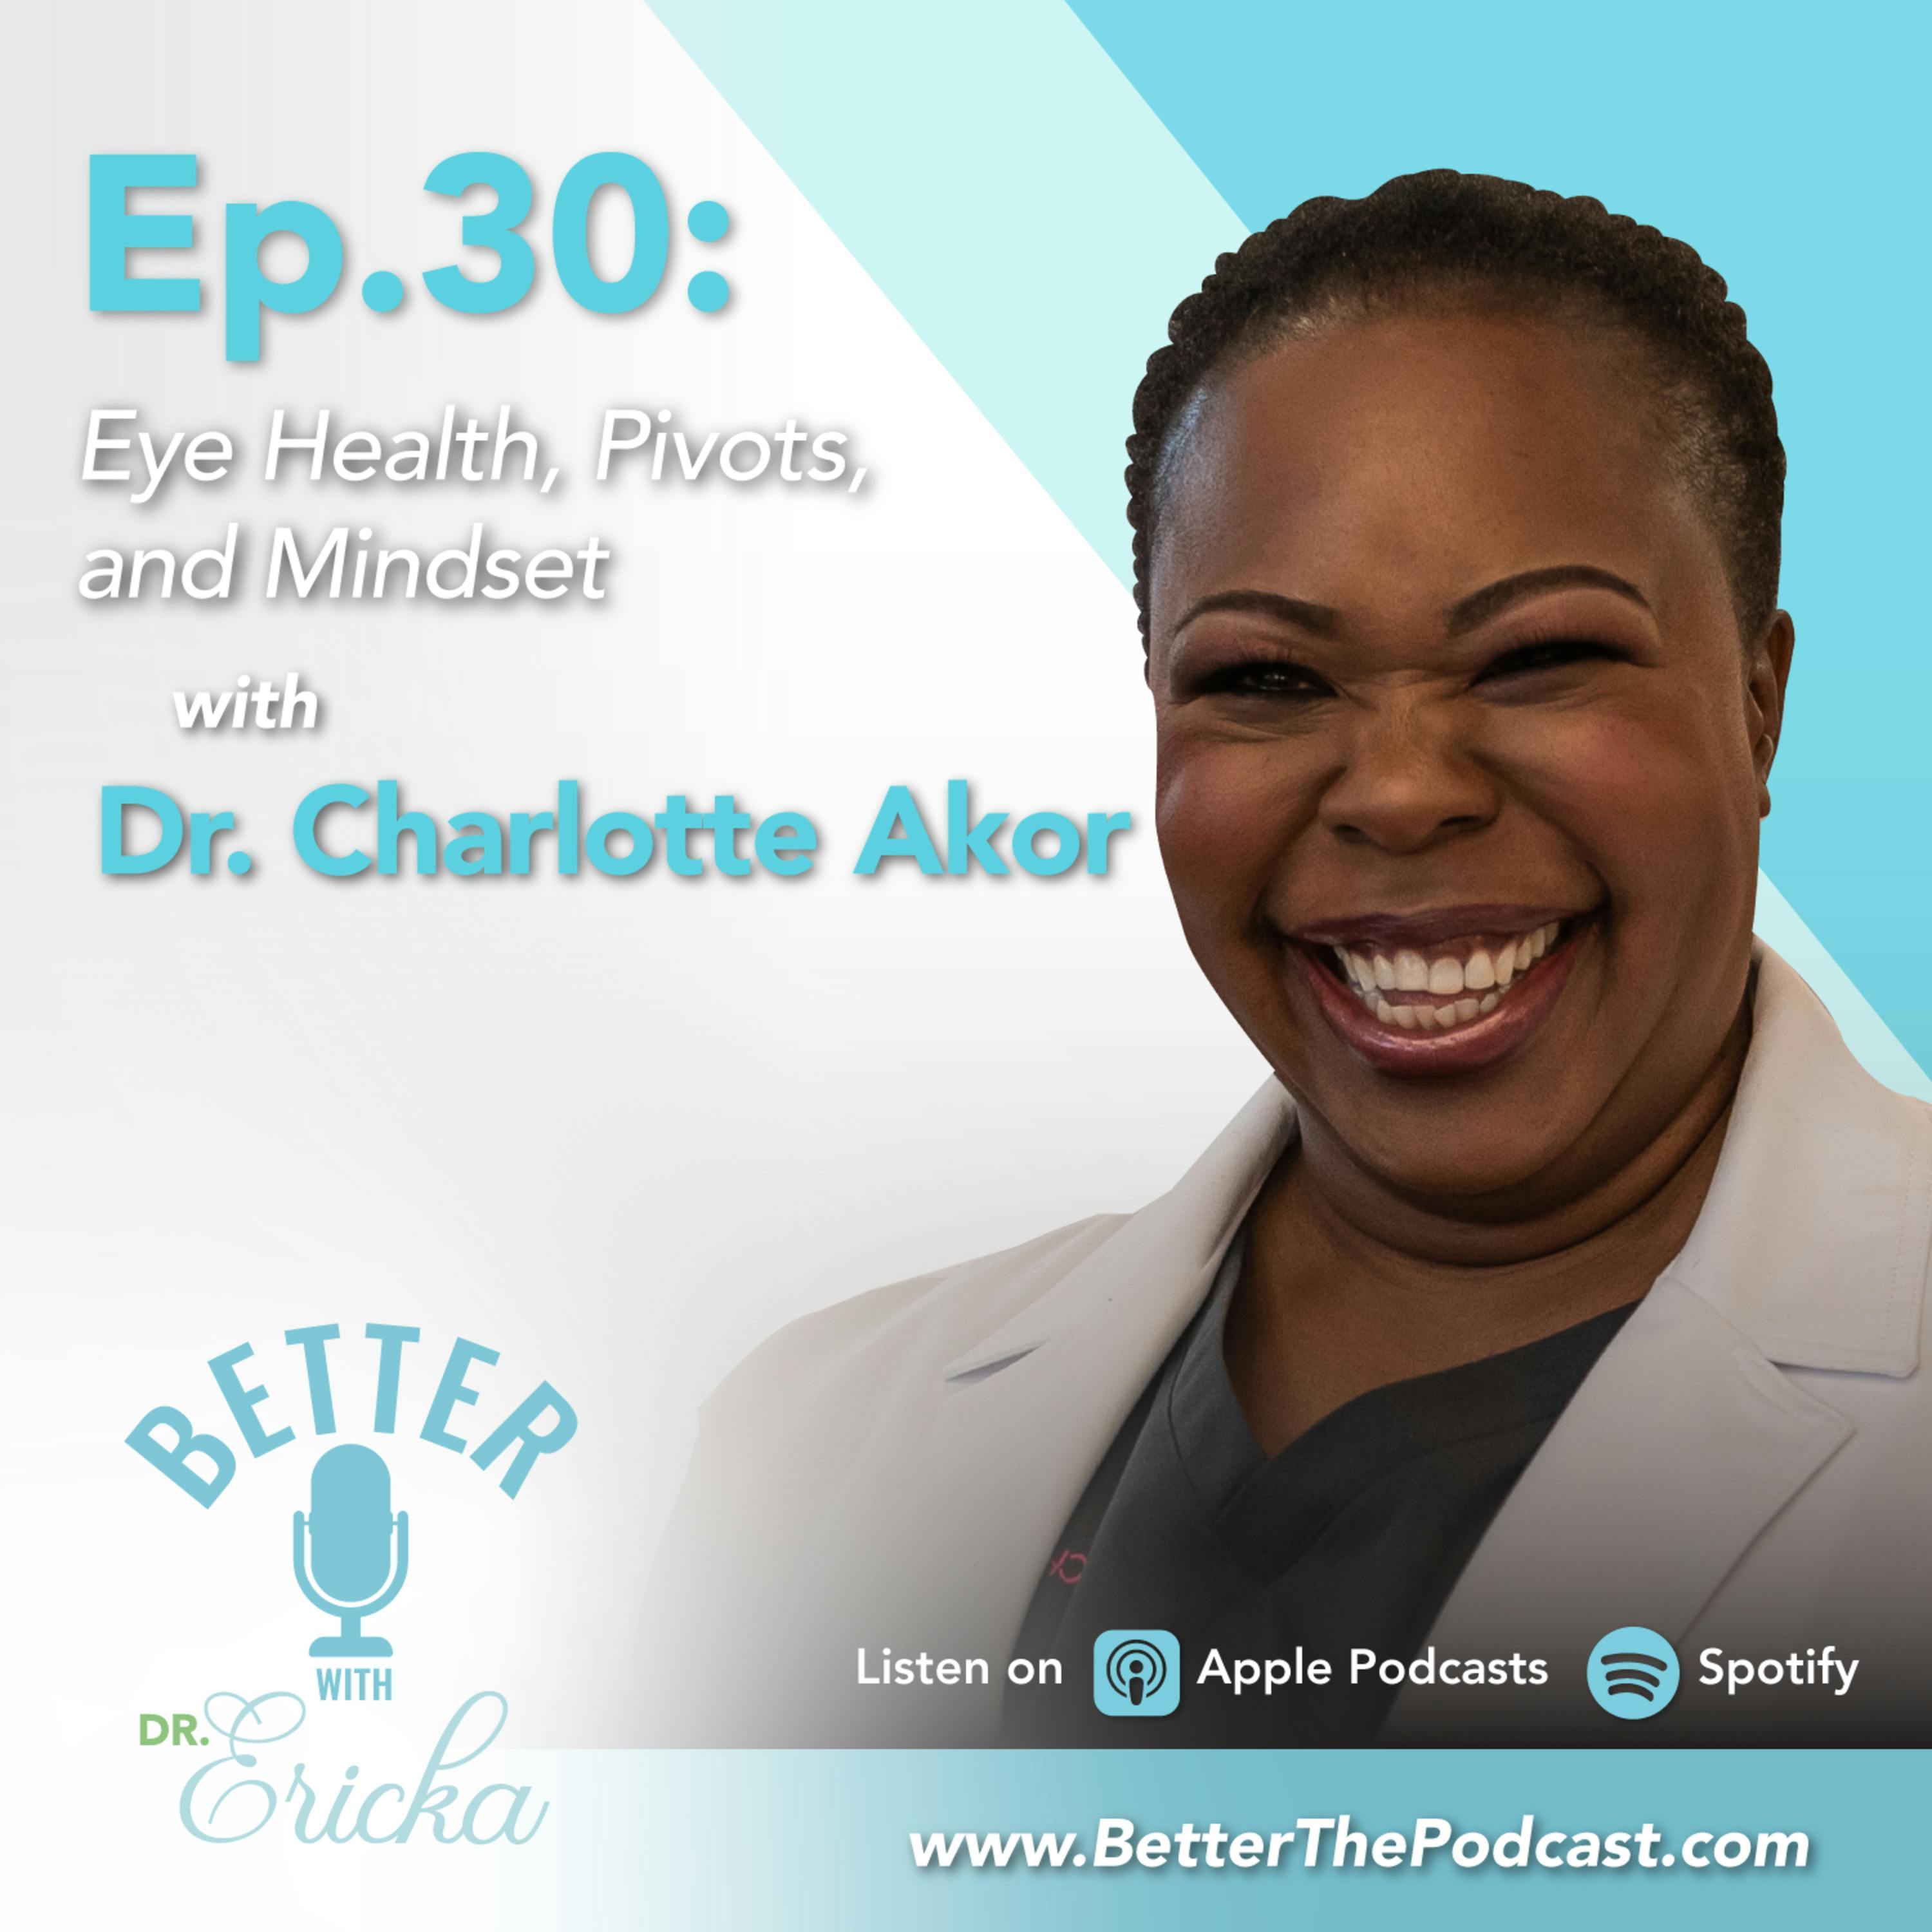 Ep. 30: Eye Health, Pivots, and Mindset with Dr. Charlotte Akor